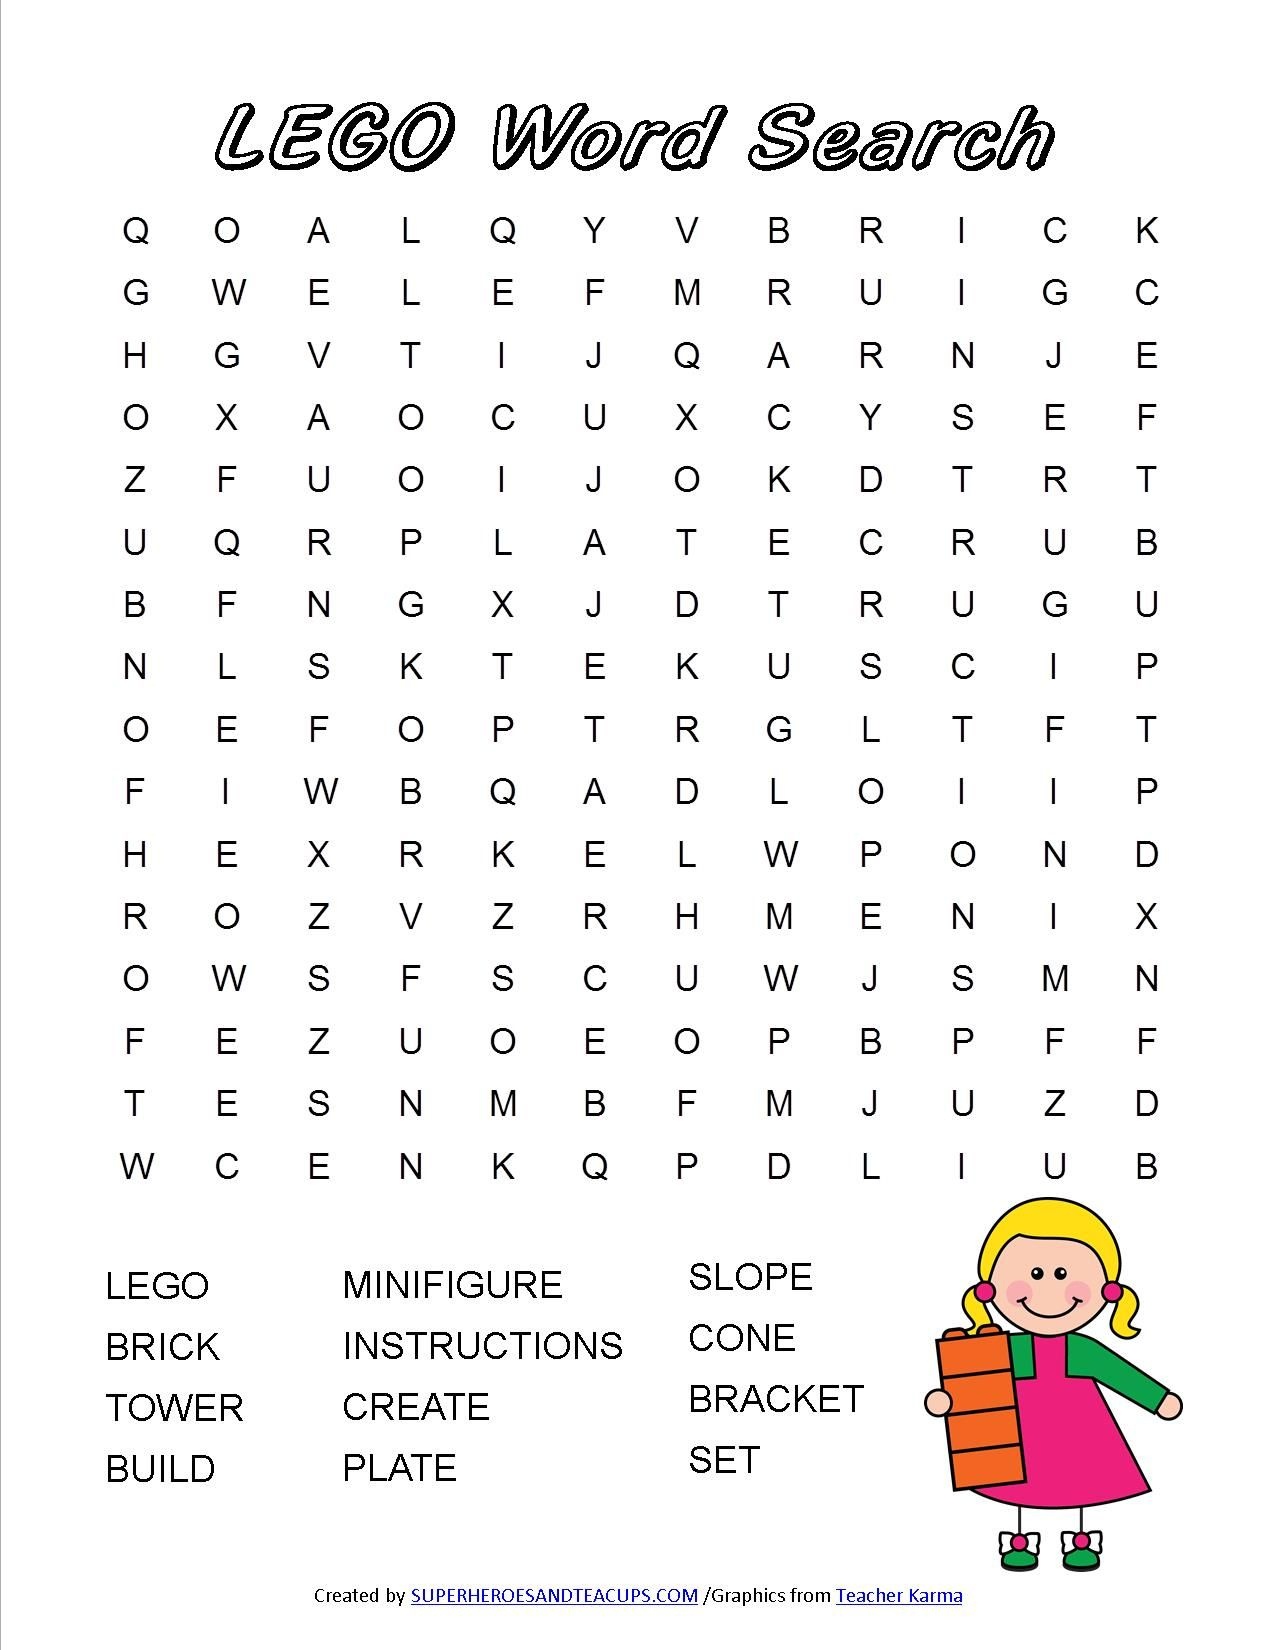 Lego Word Search Free Printable | Батьківство - Create Word Search Free Printable